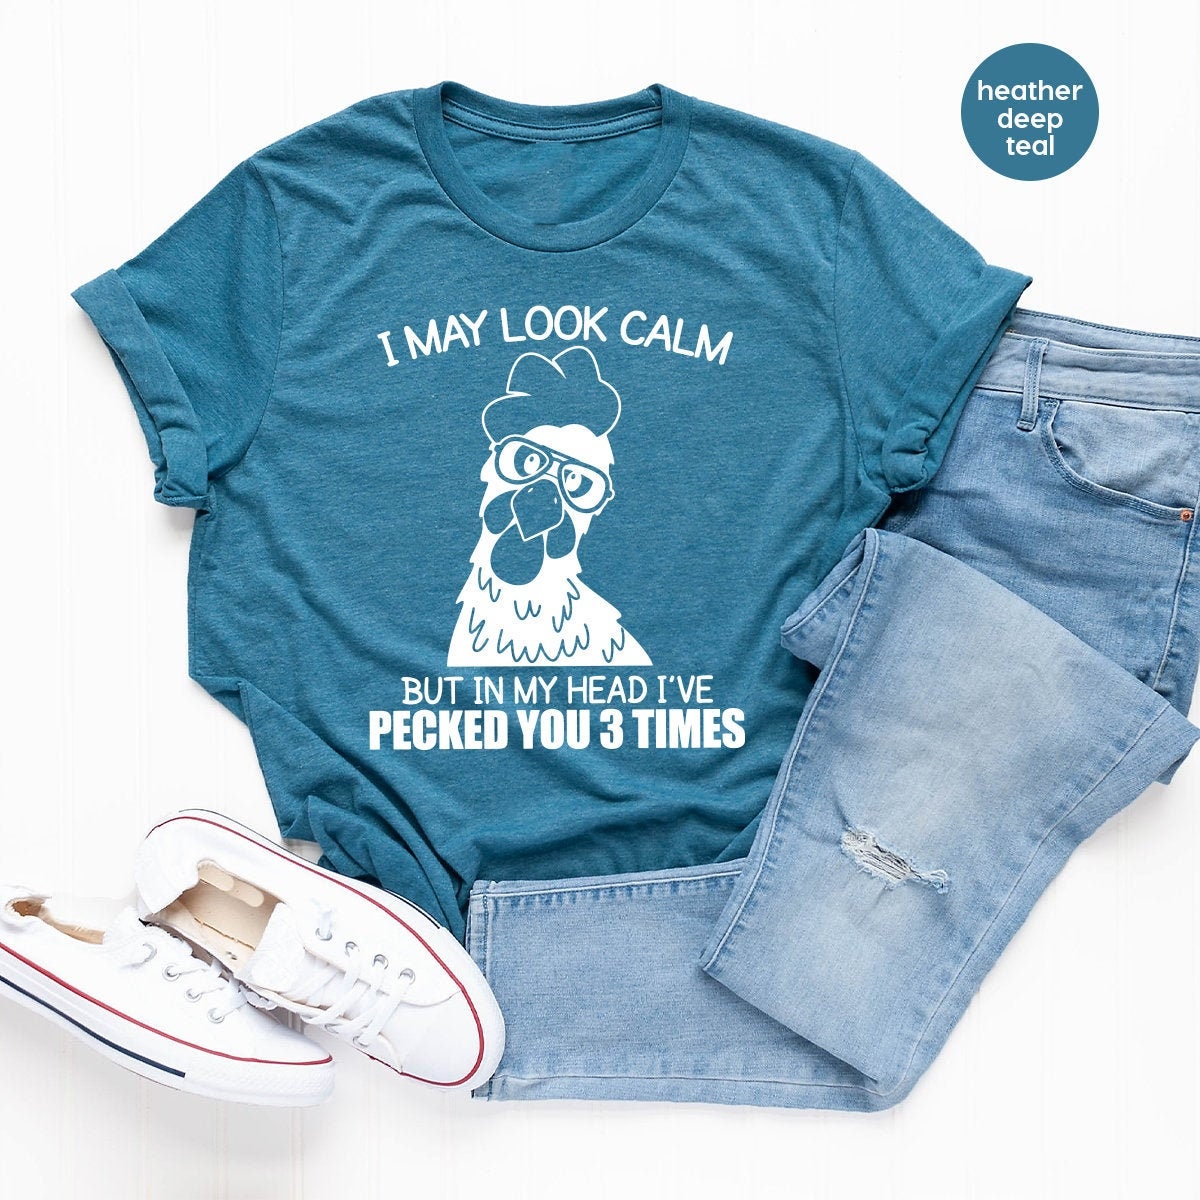 Funny Quote T Shirt, Rooster Humor Shirt, Sarcastic Shirt, I May Look Calm But In My Head I've Pecked You 3 Times Shirt, Funny Chicken Shirt - Fastdeliverytees.com